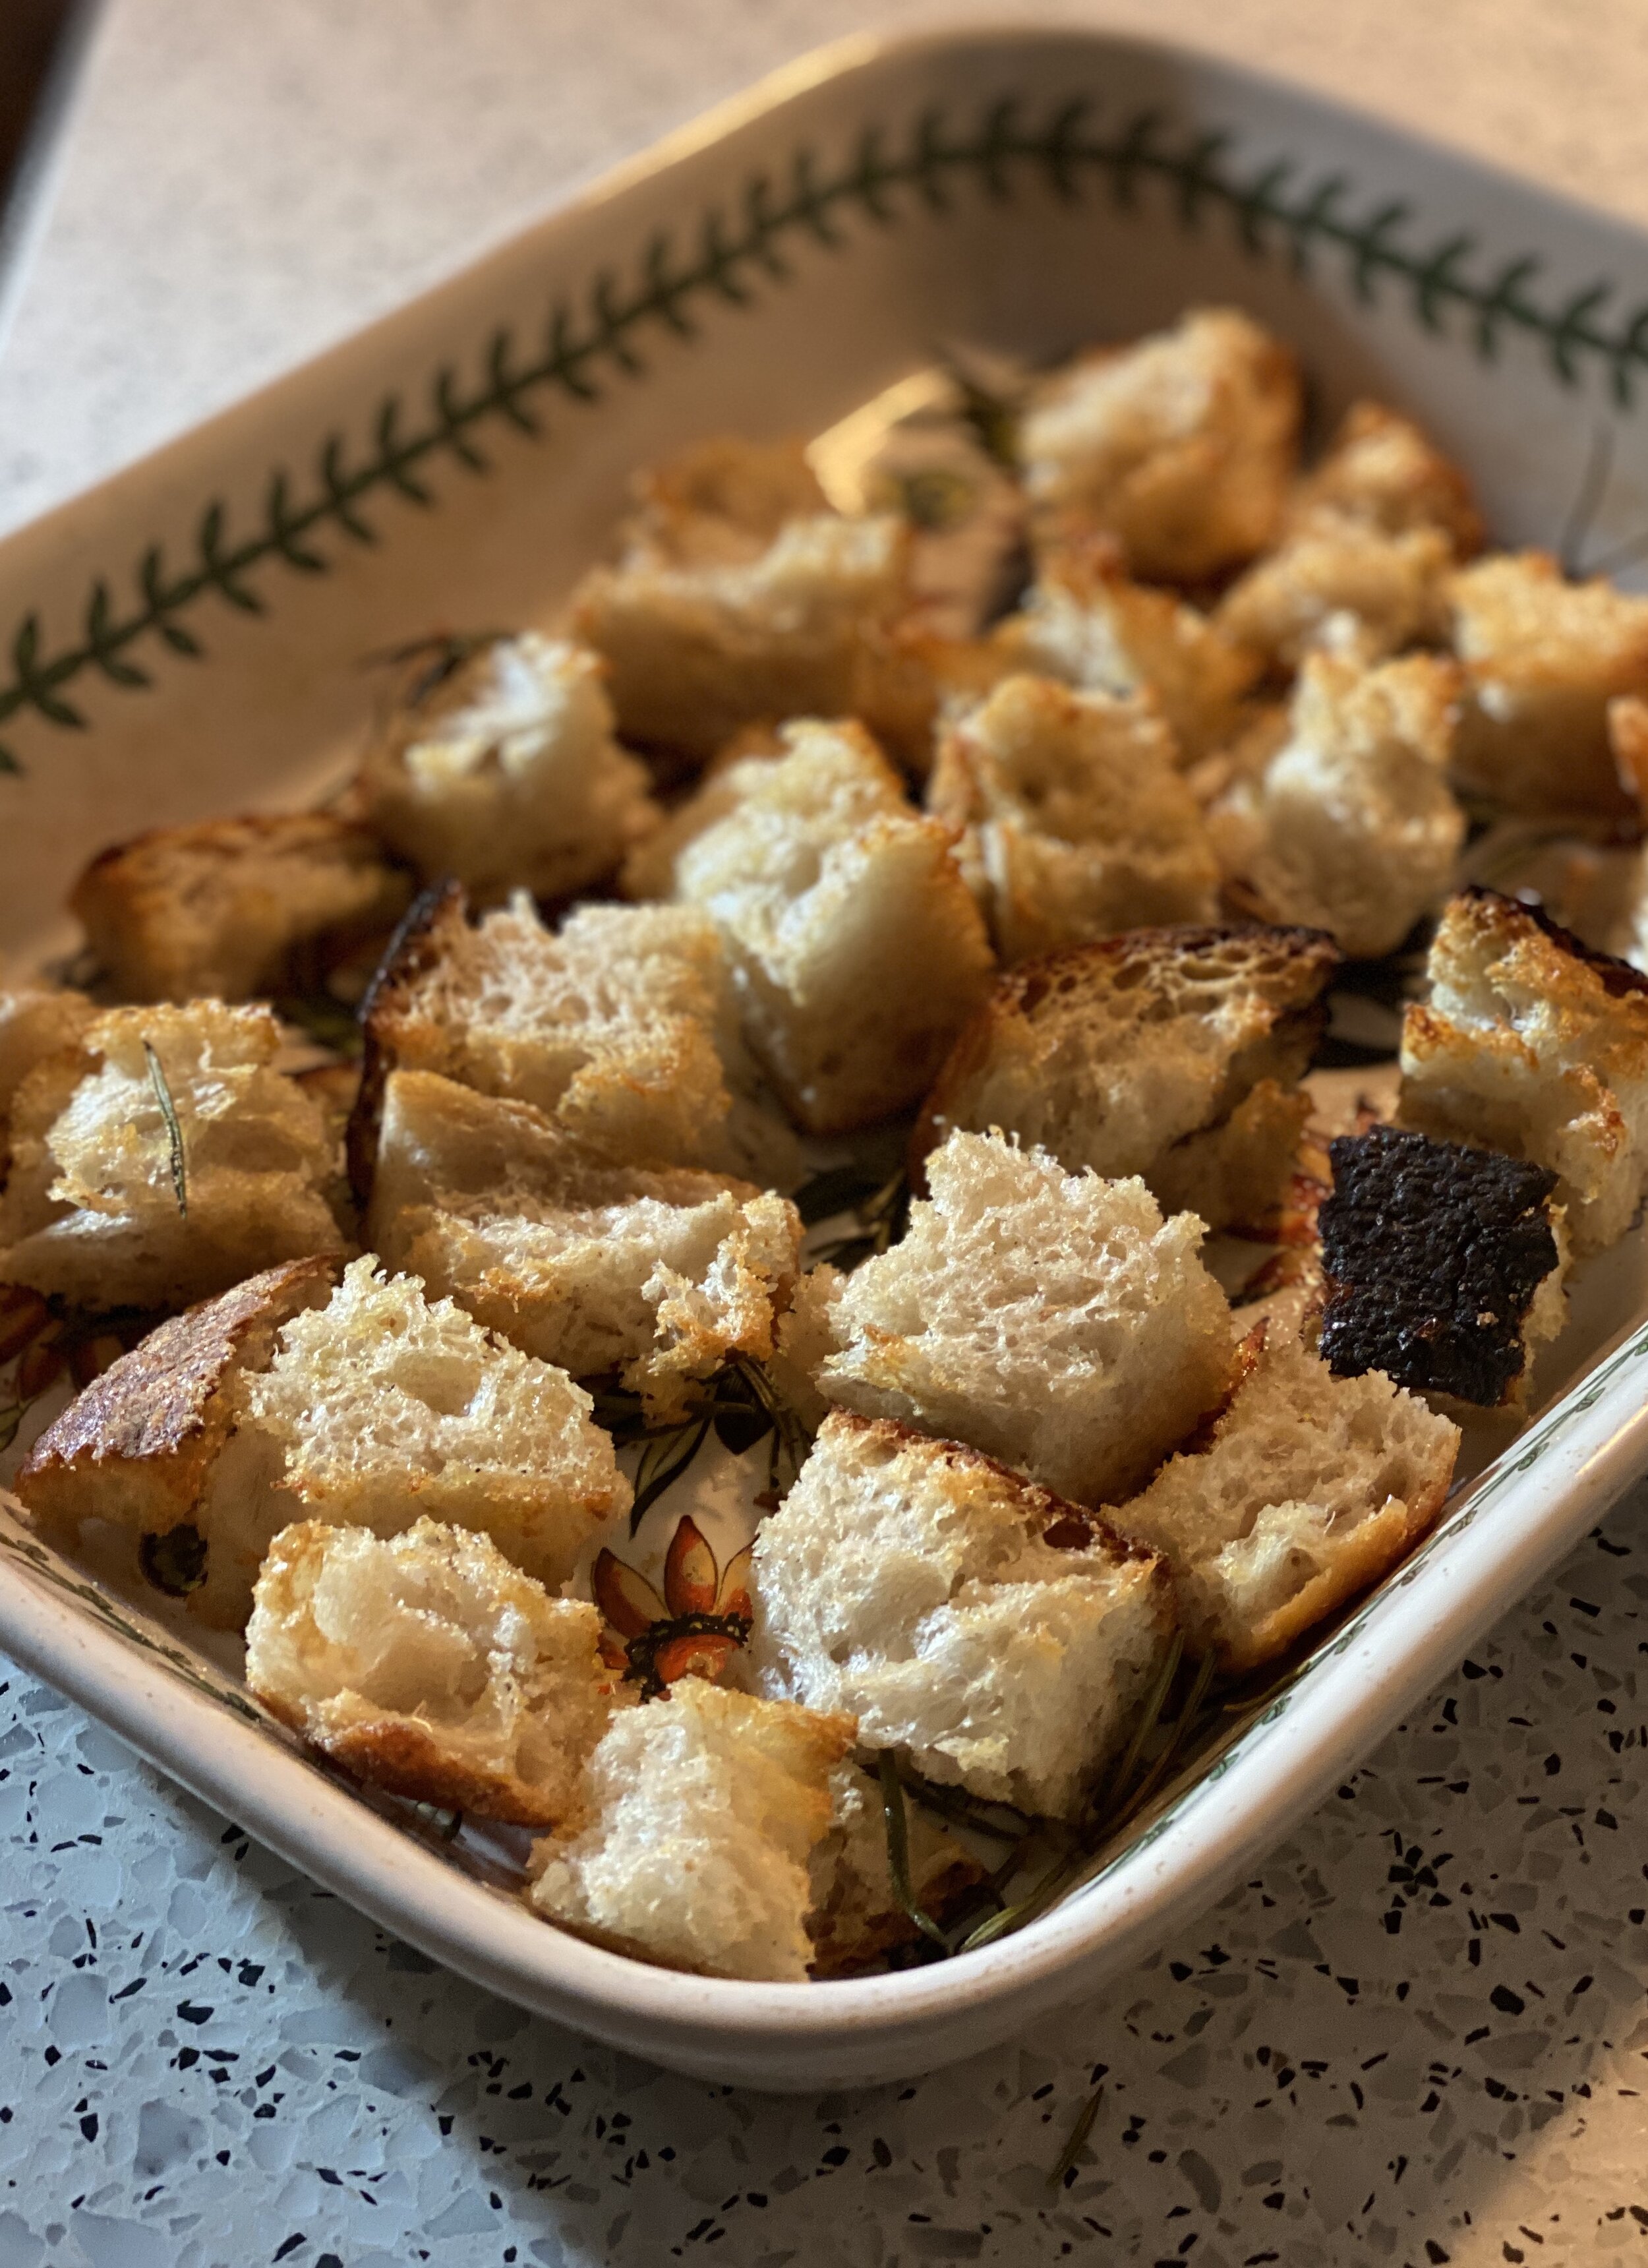 Sourdough croutons in an oven tray